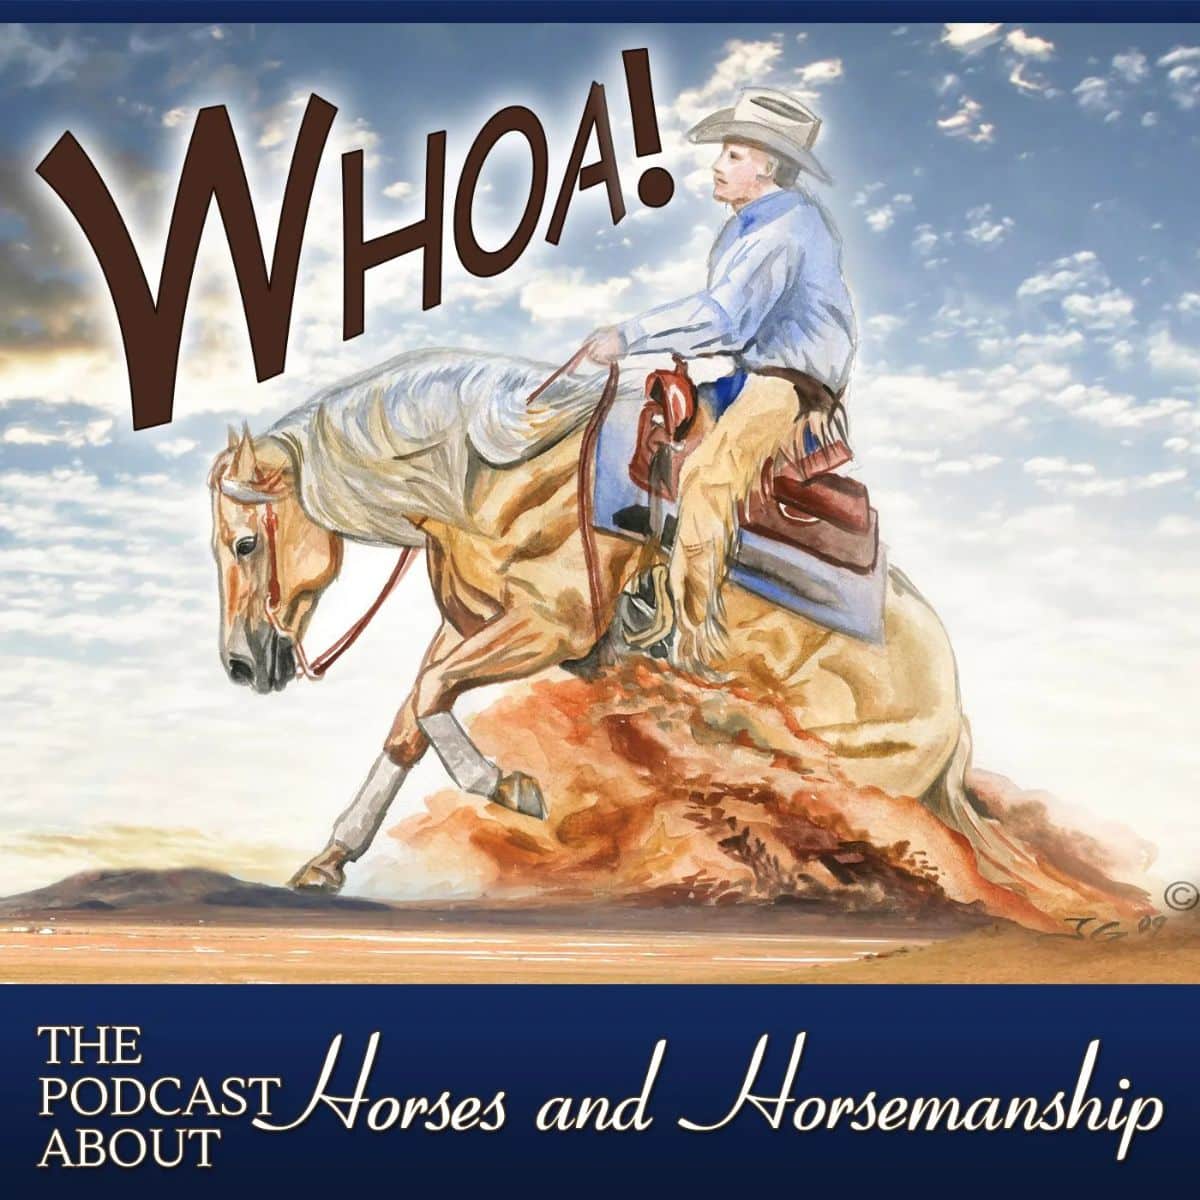 The Whoa Podcast About Horses and Horsemanship podcast poster.